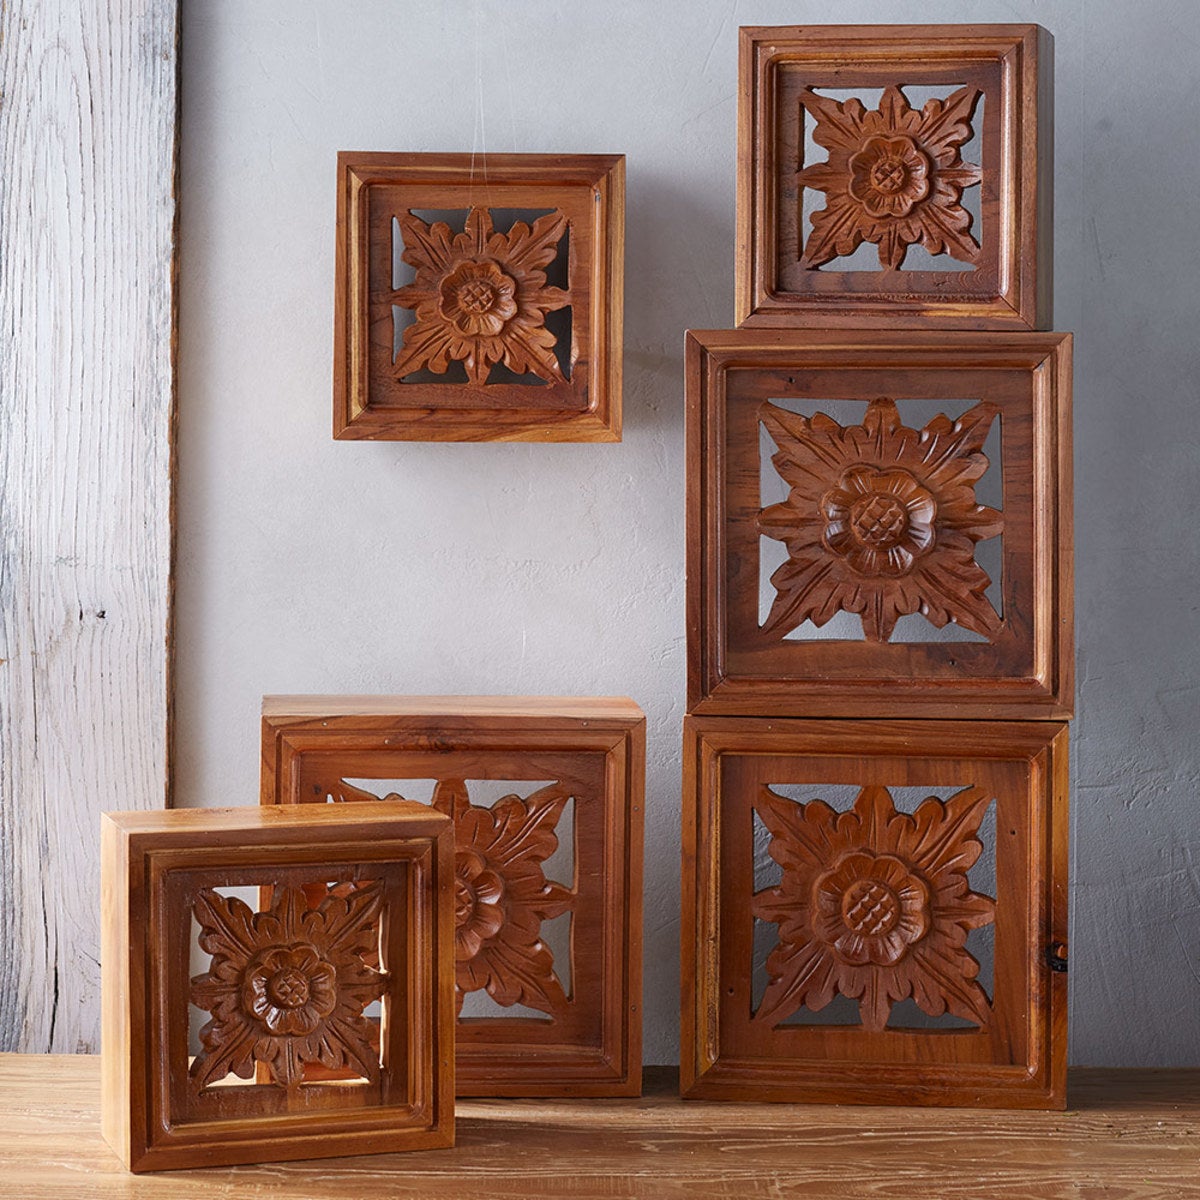 Handcarved Floral Wall Boxes